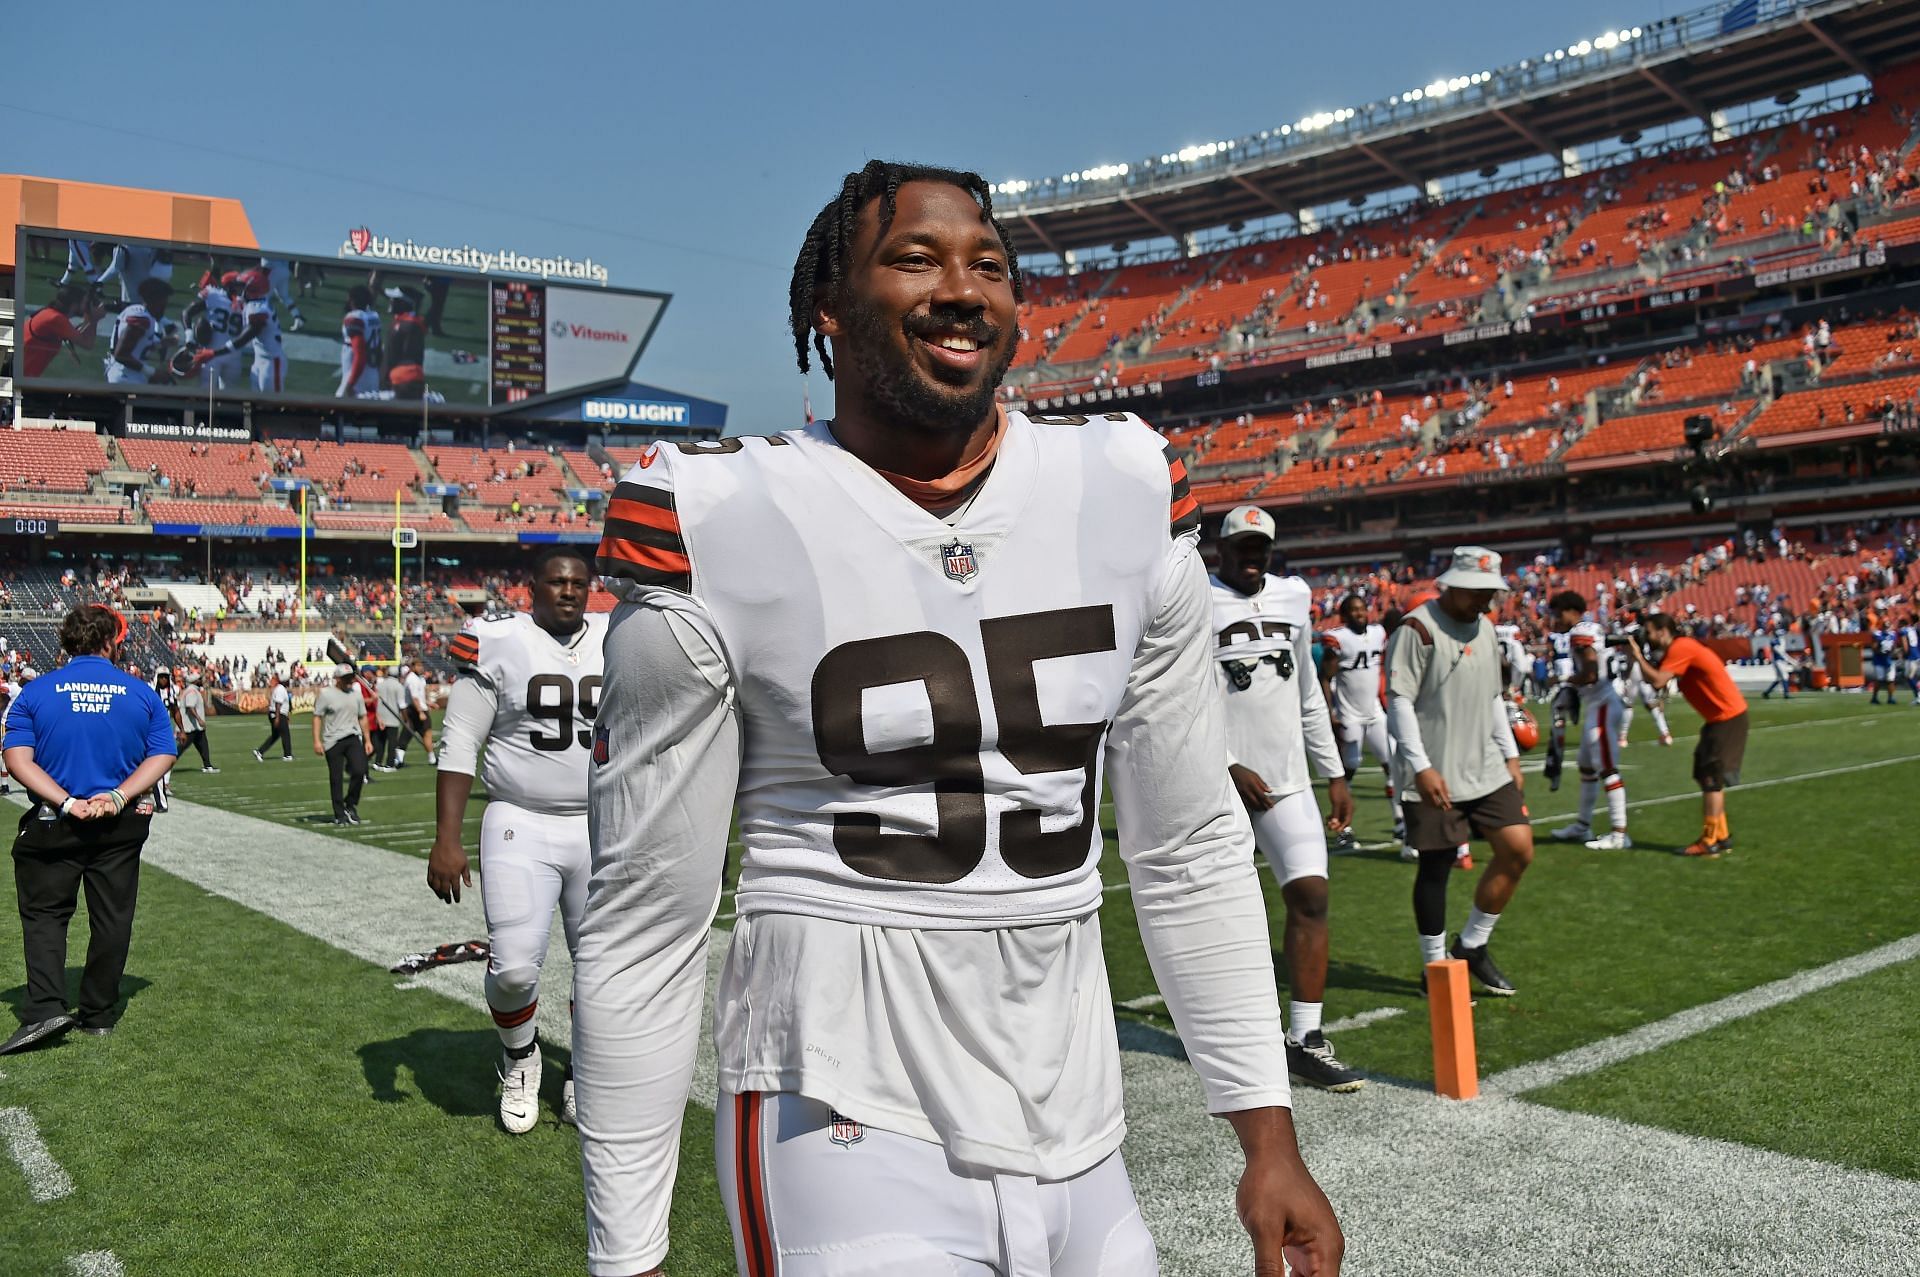 Myles Garrett has set a goal for himself that he would only visit the Hall of Fame after being inducted in it